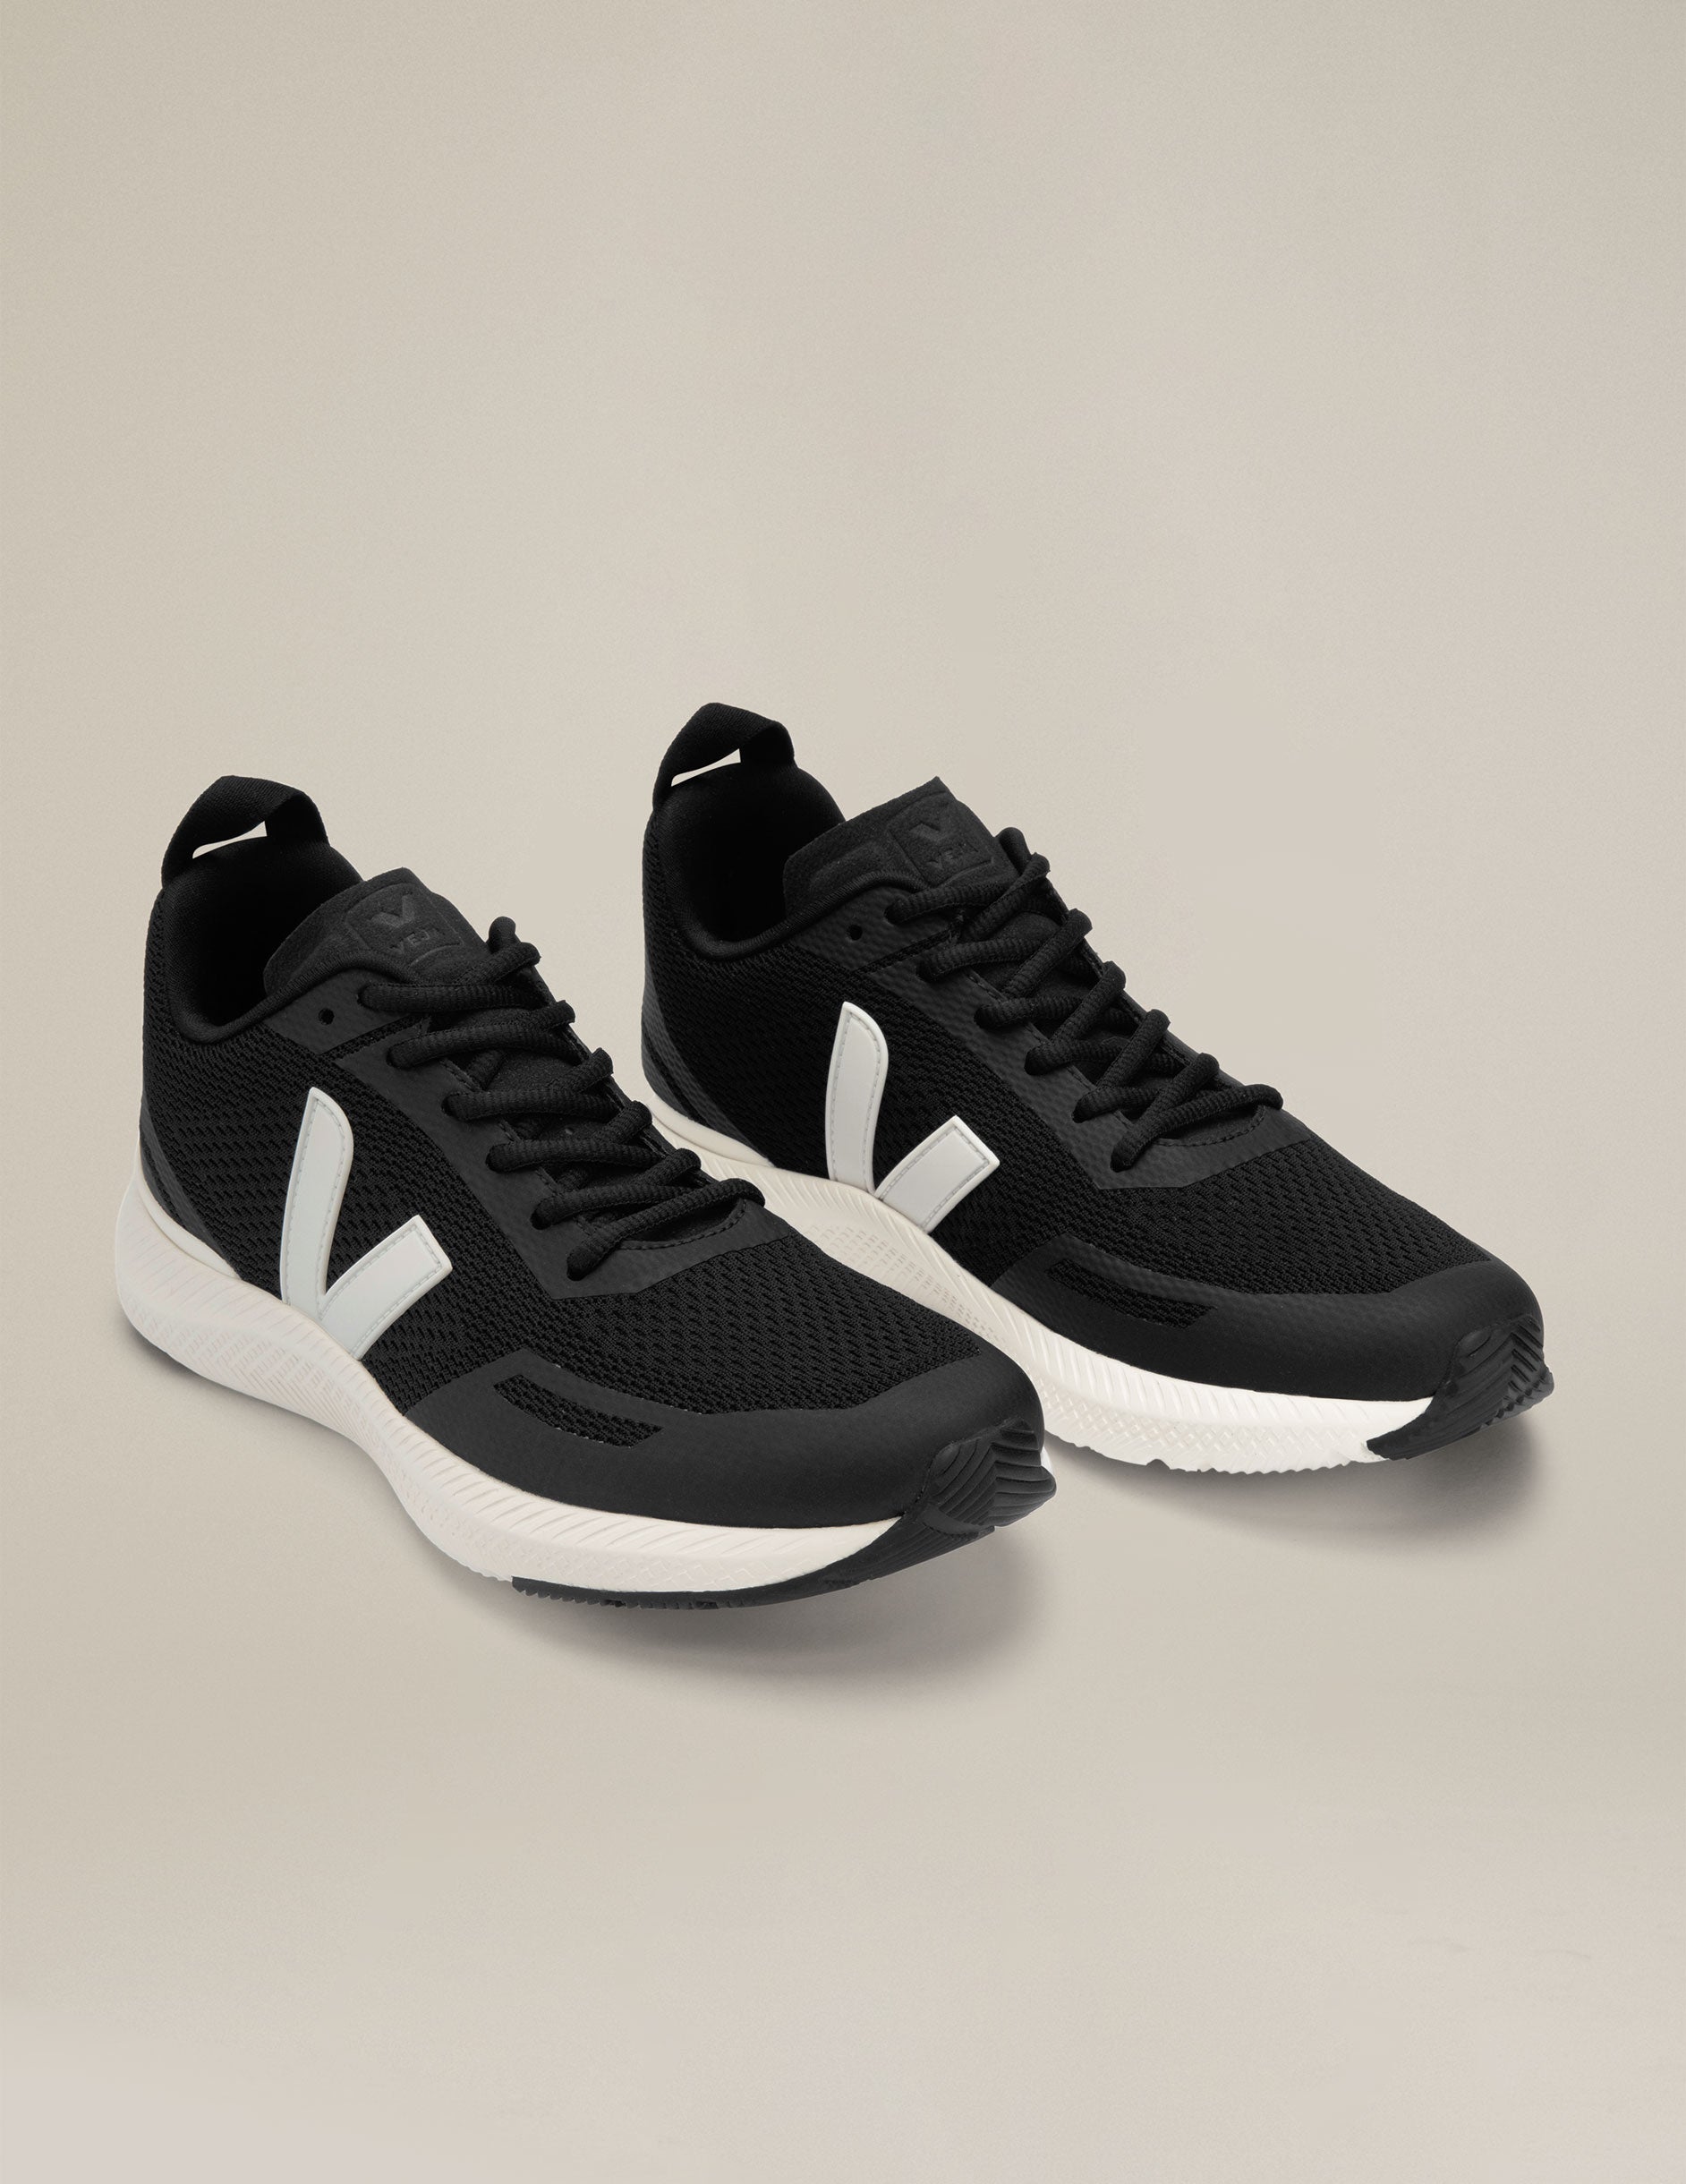 black and white Veja Impala running shoes. made in Brazil.